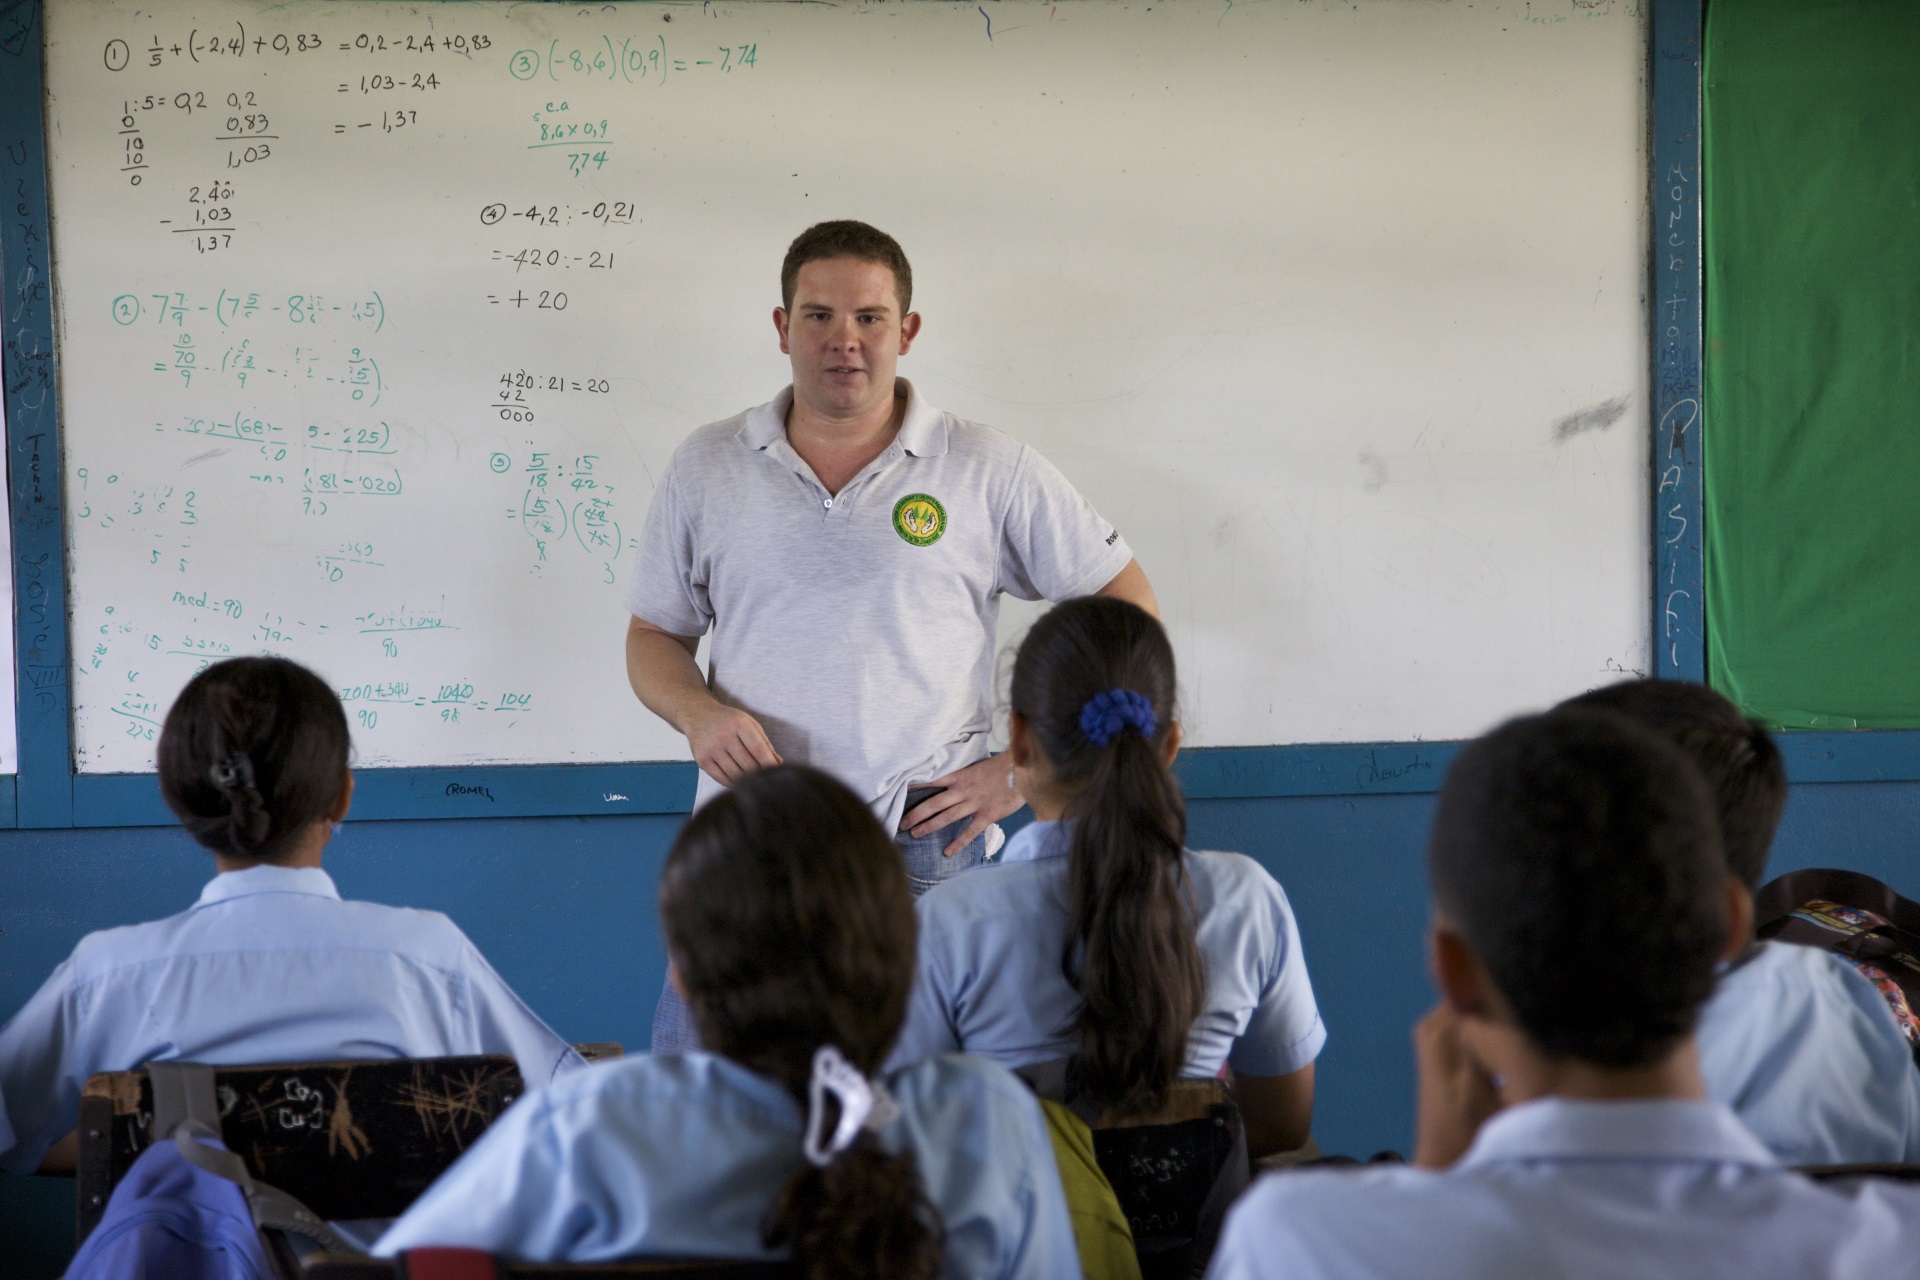 Image of a man from the Peace Corps teaching a class